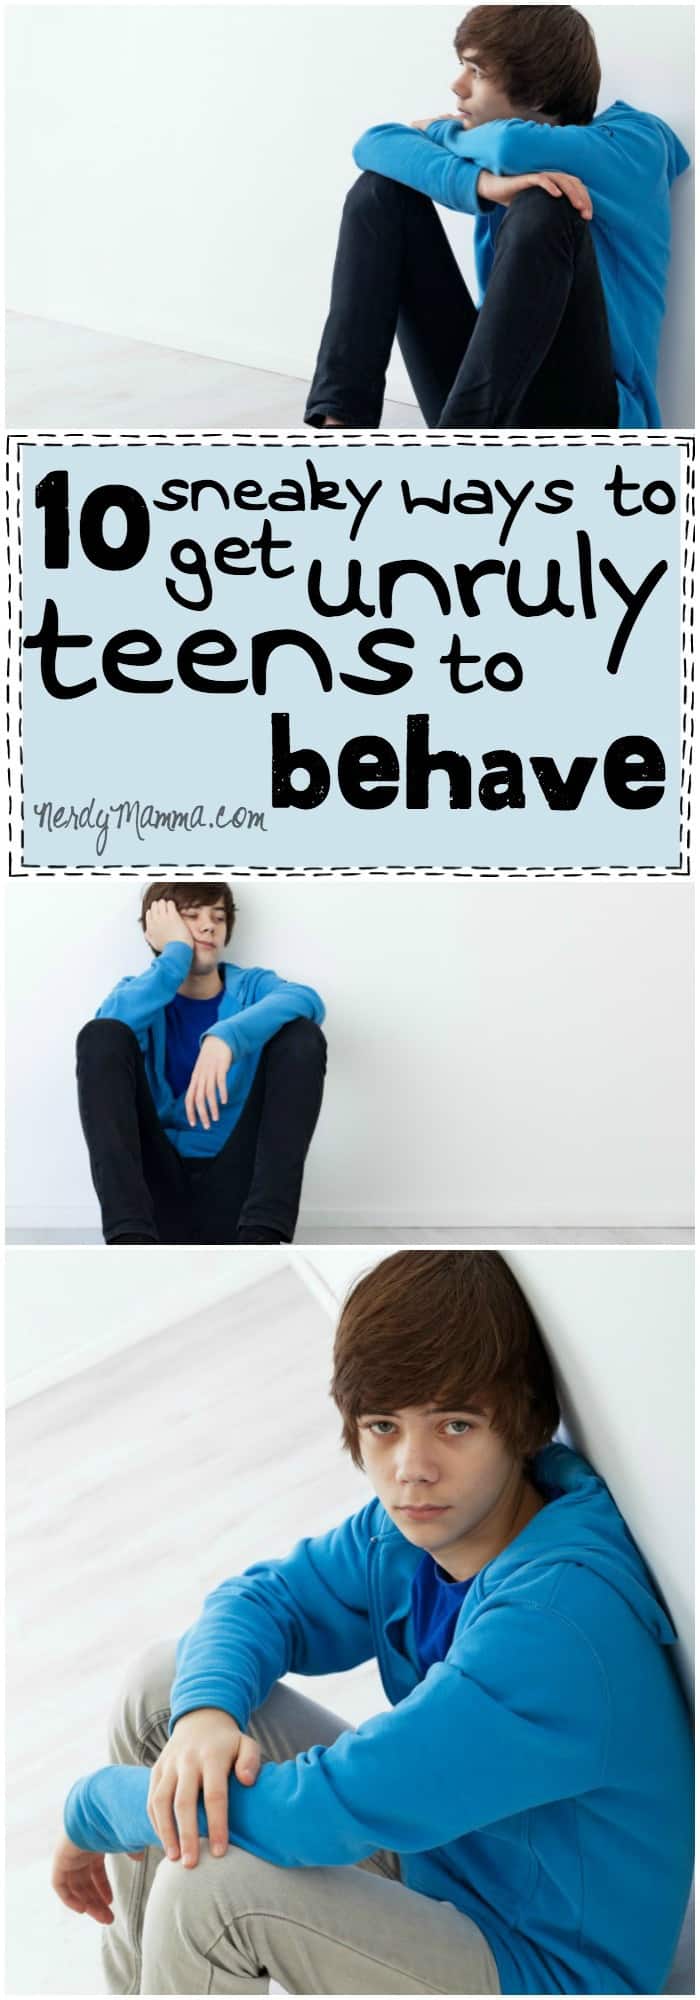 I love these tips on how to get teens to behave. Especially #10. Kinda funny.2